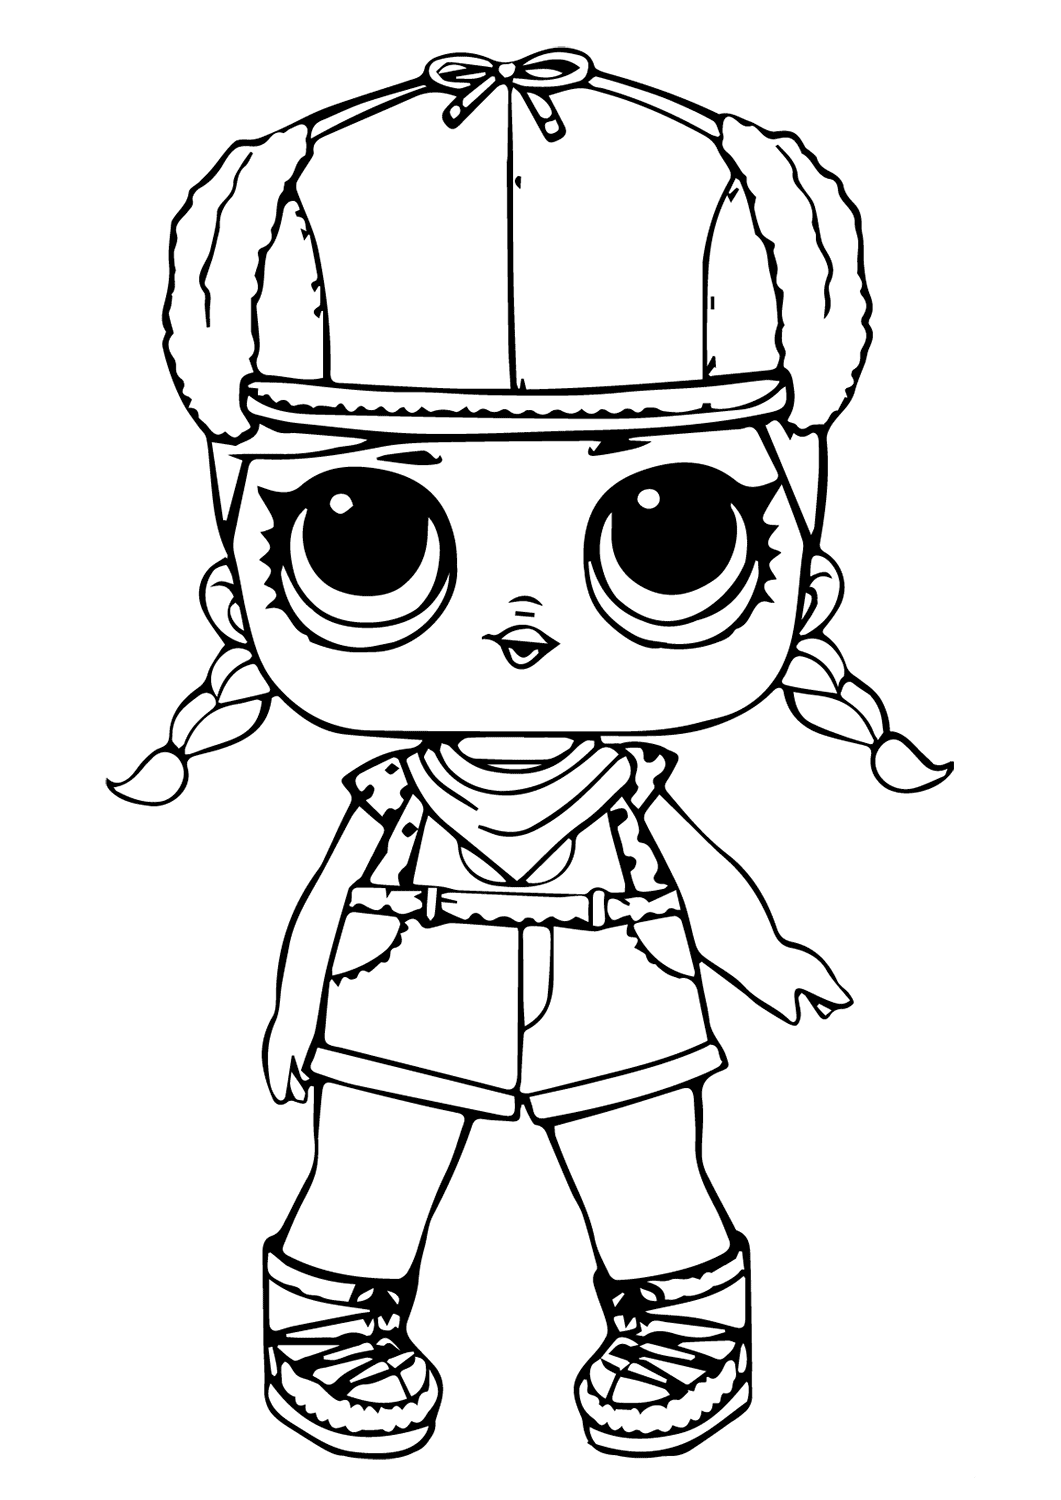 Download 40 Free Printable Lol Surprise Dolls Coloring Pages